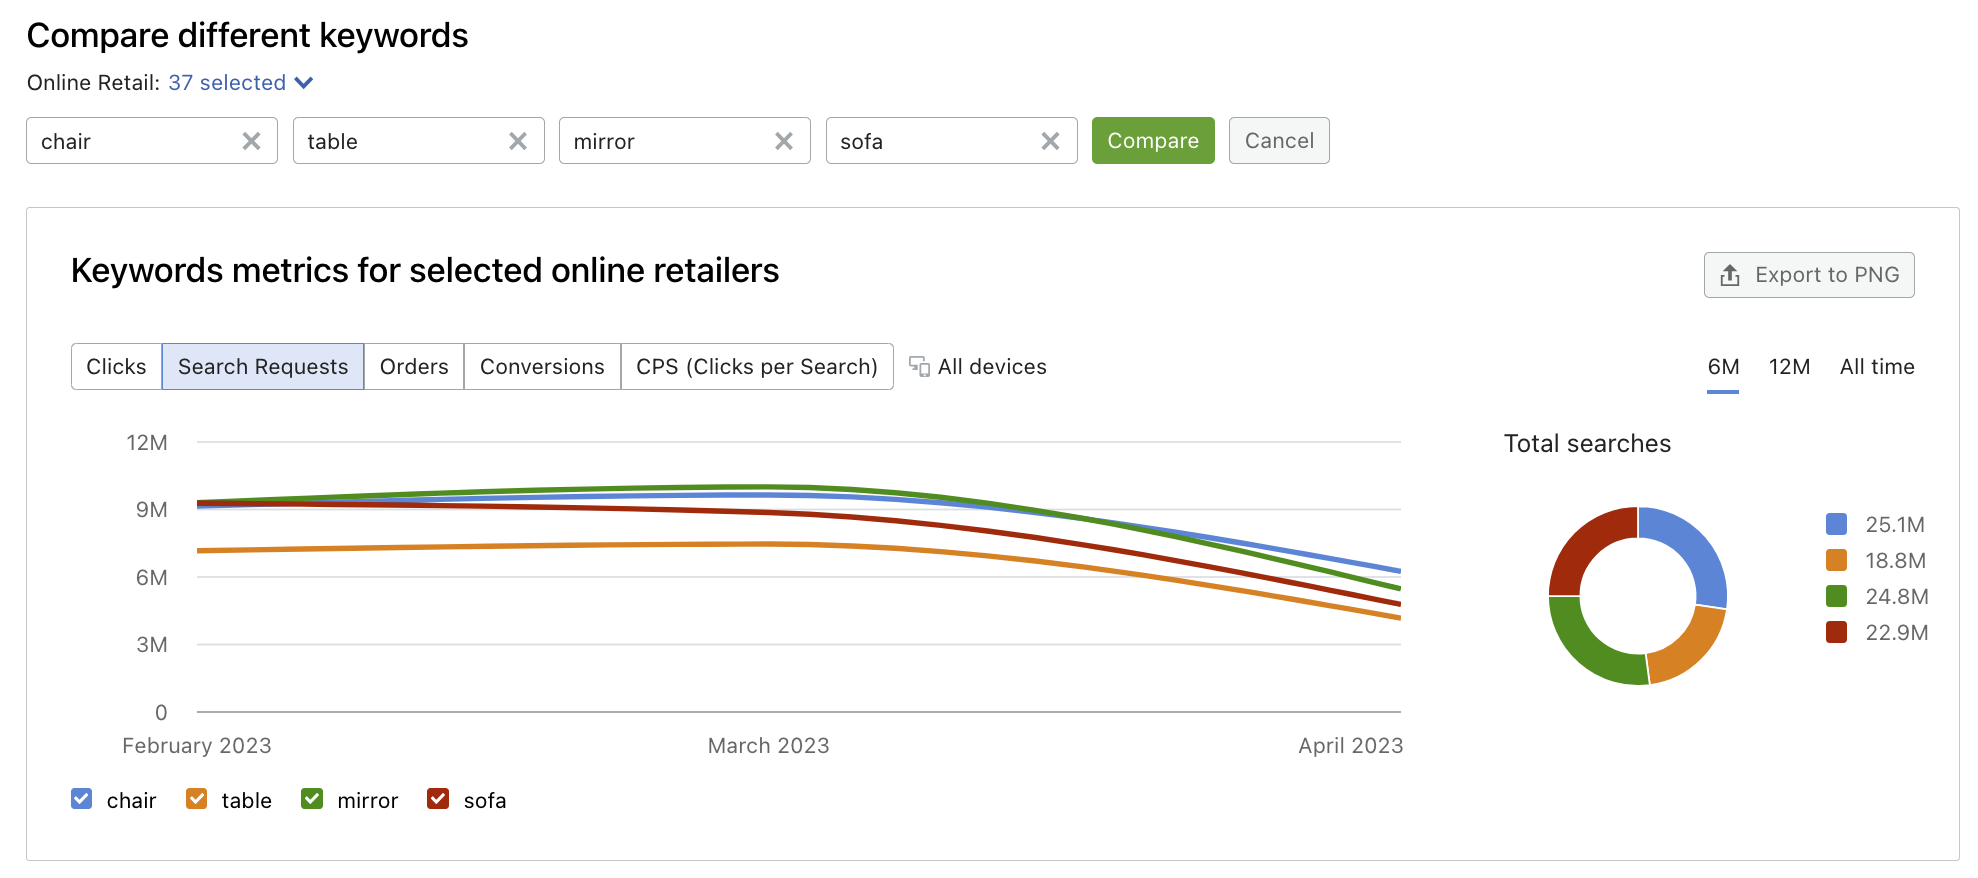 An example of a chart in the Overview tab that allows you to compare keyword metrics for selected retailers.